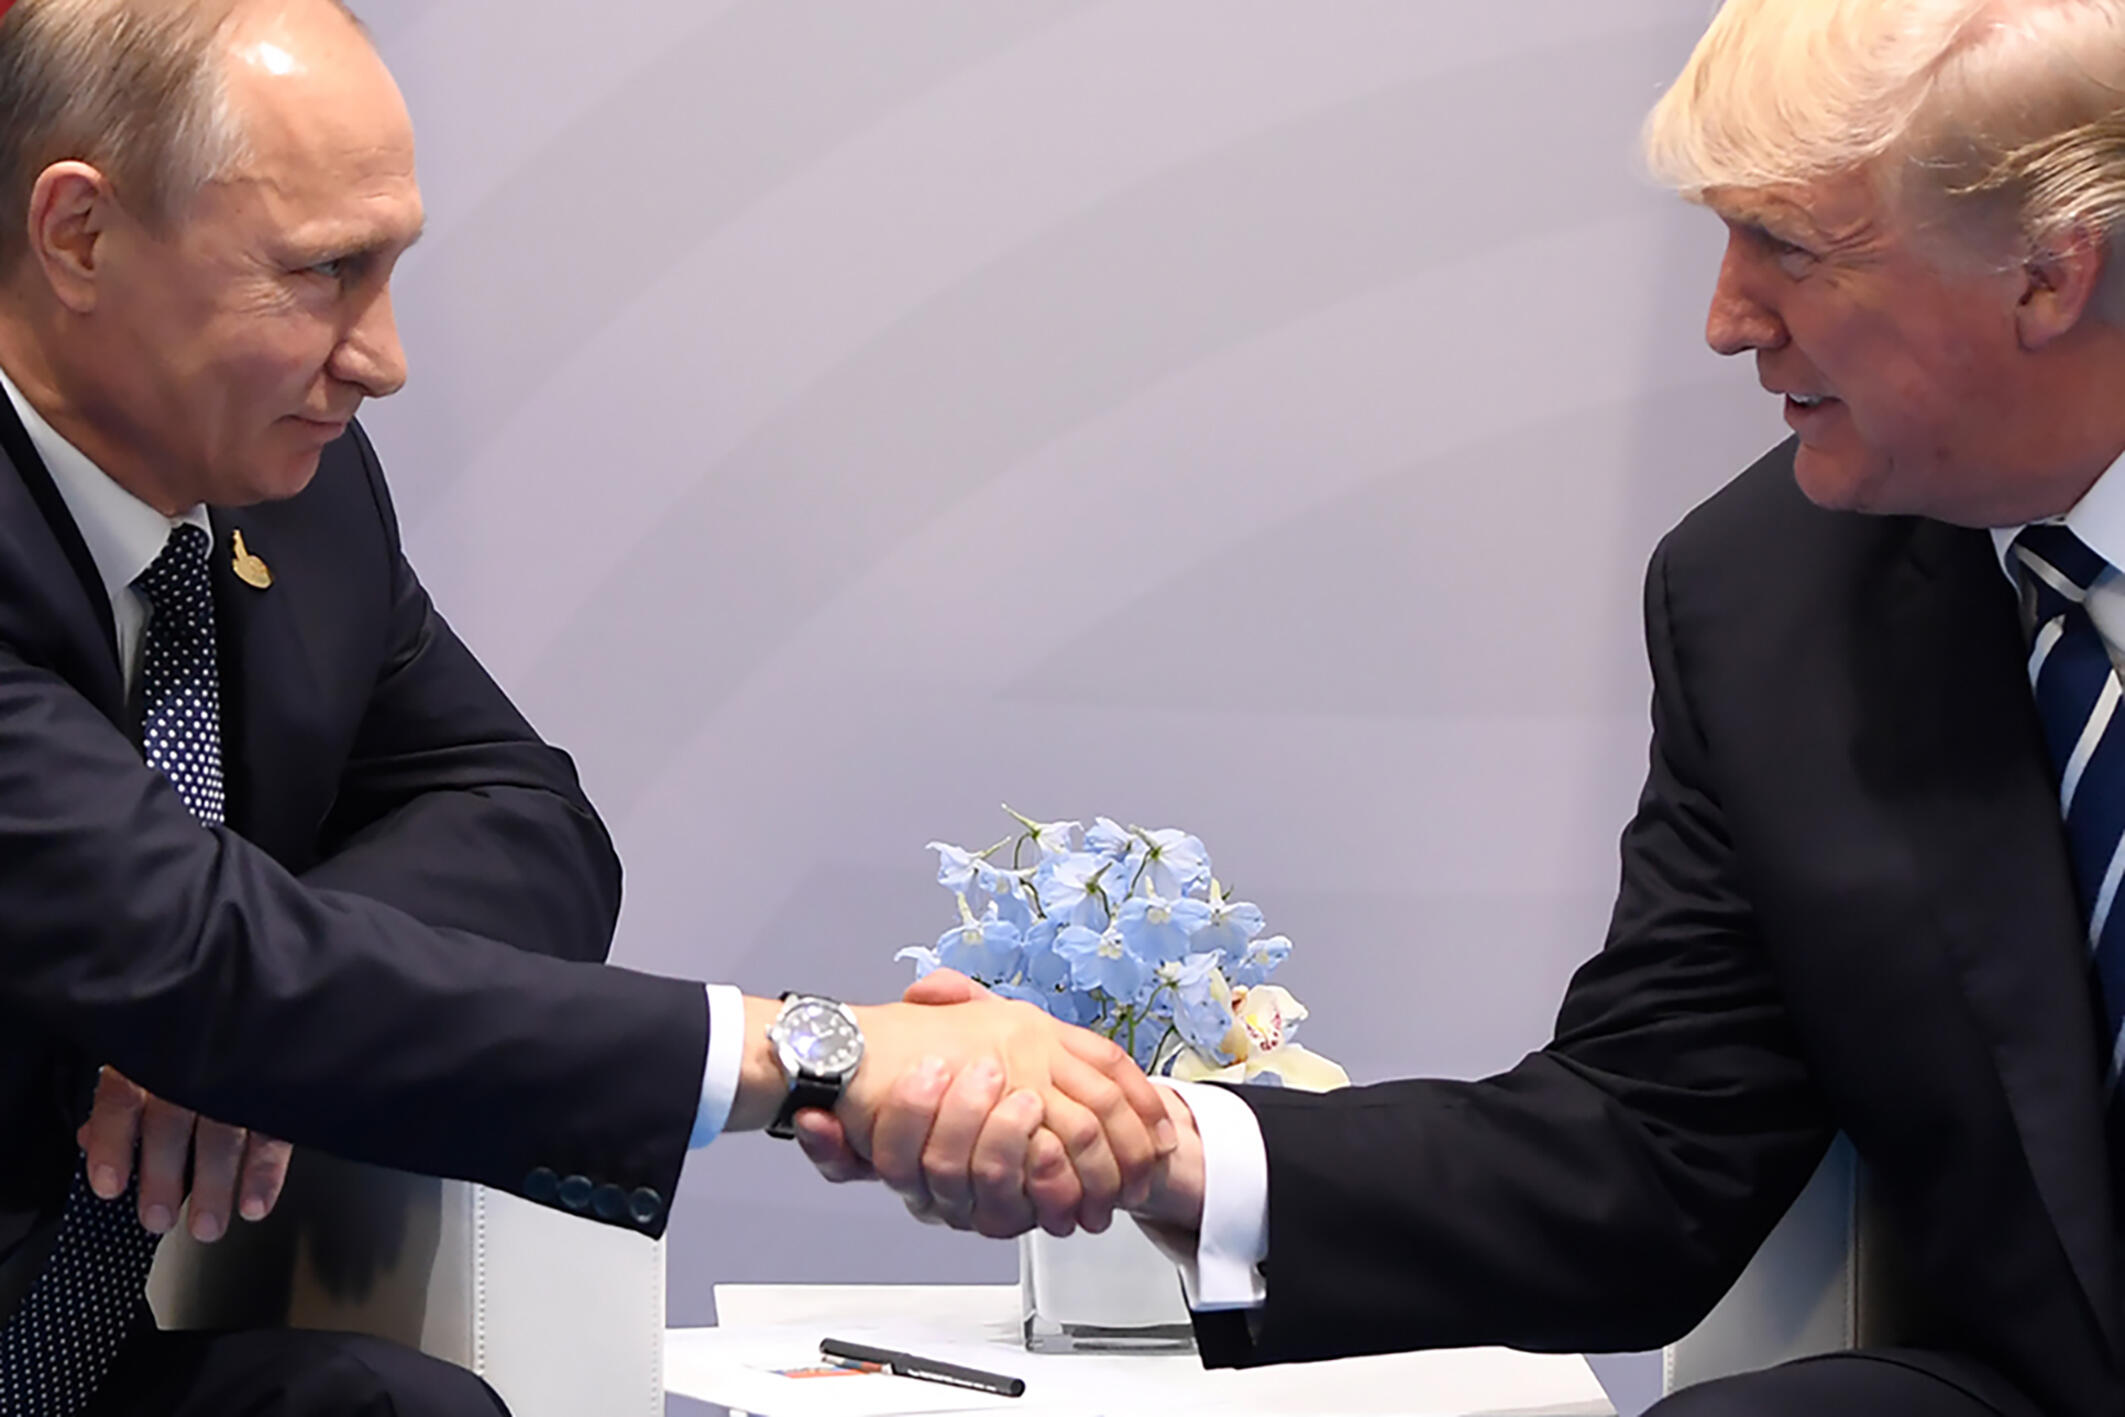 TOPSHOT - US President Donald Trump and Russia's President Vladimir Putin shake hands during a meeting on the sidelines of the G20 Summit in Hamburg, Germany, on July 7, 2017. / AFP PHOTO / SAUL LOEB        (Photo credit should read SAUL LOEB/AFP/Getty Im